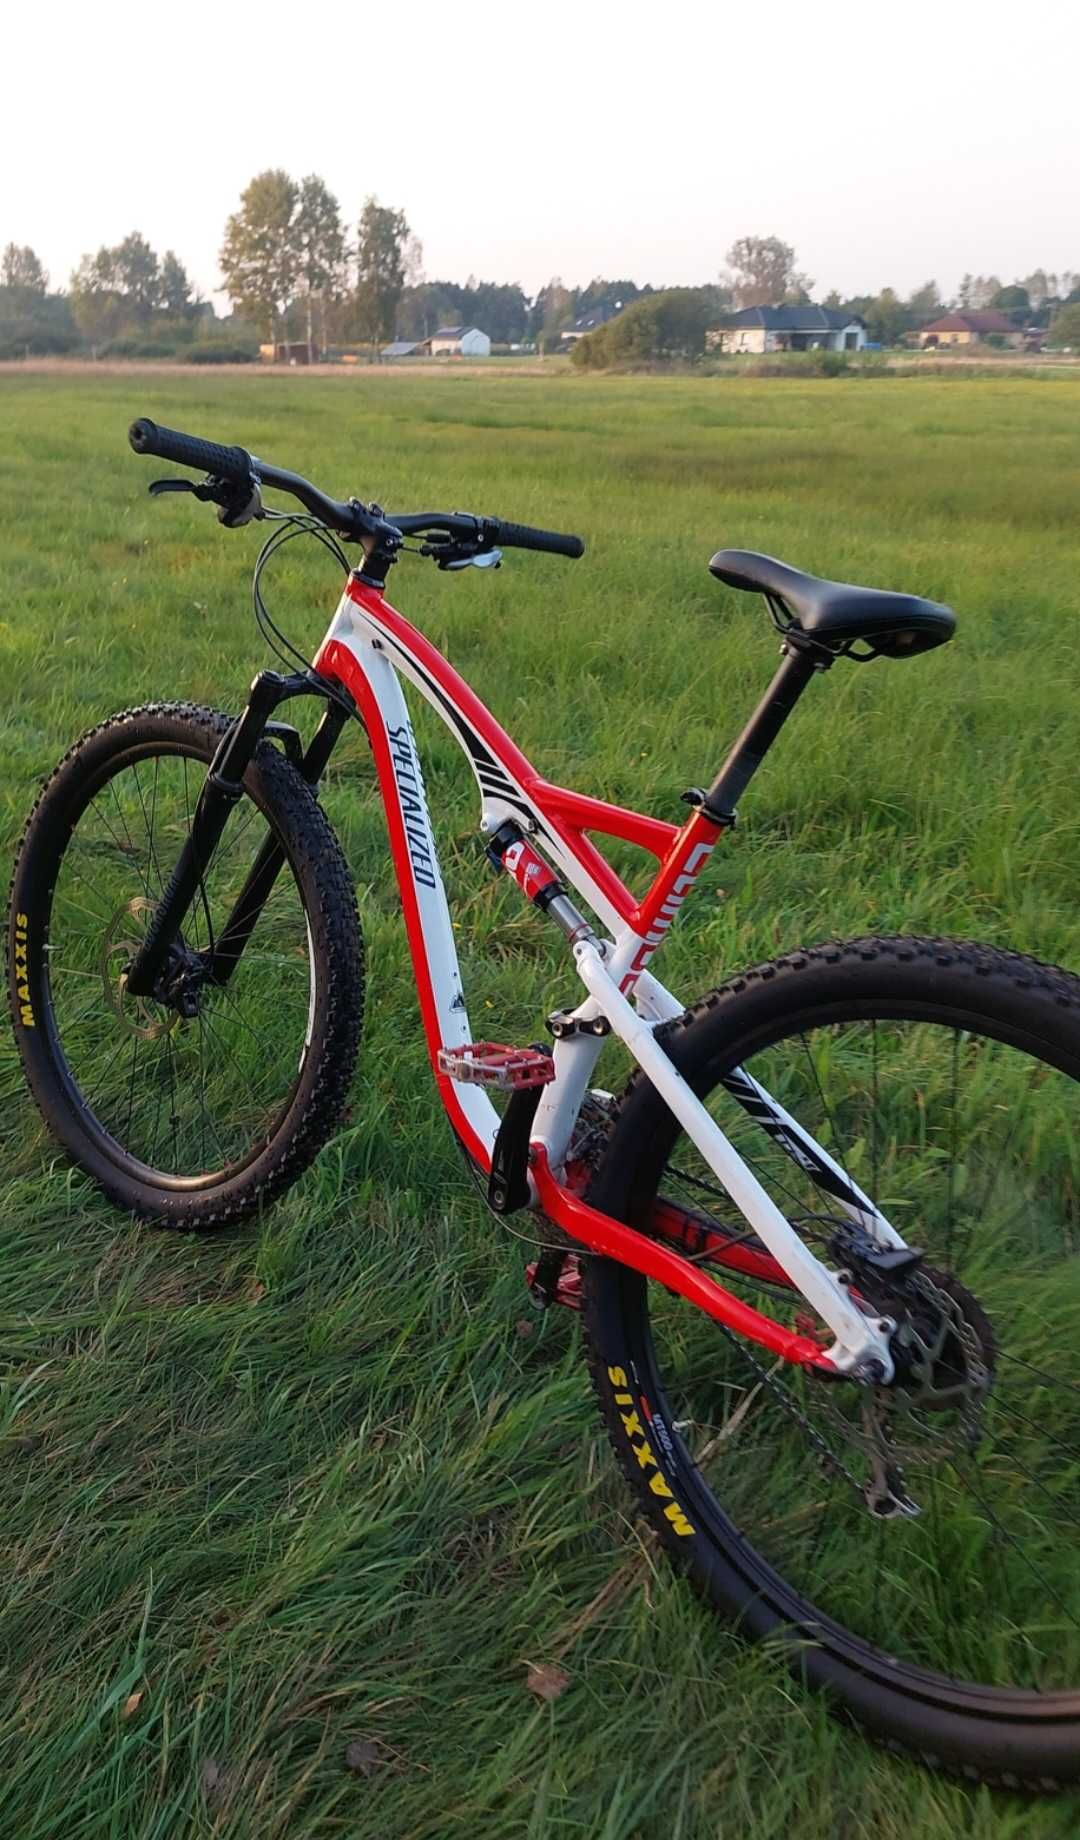 Specialized camber 29